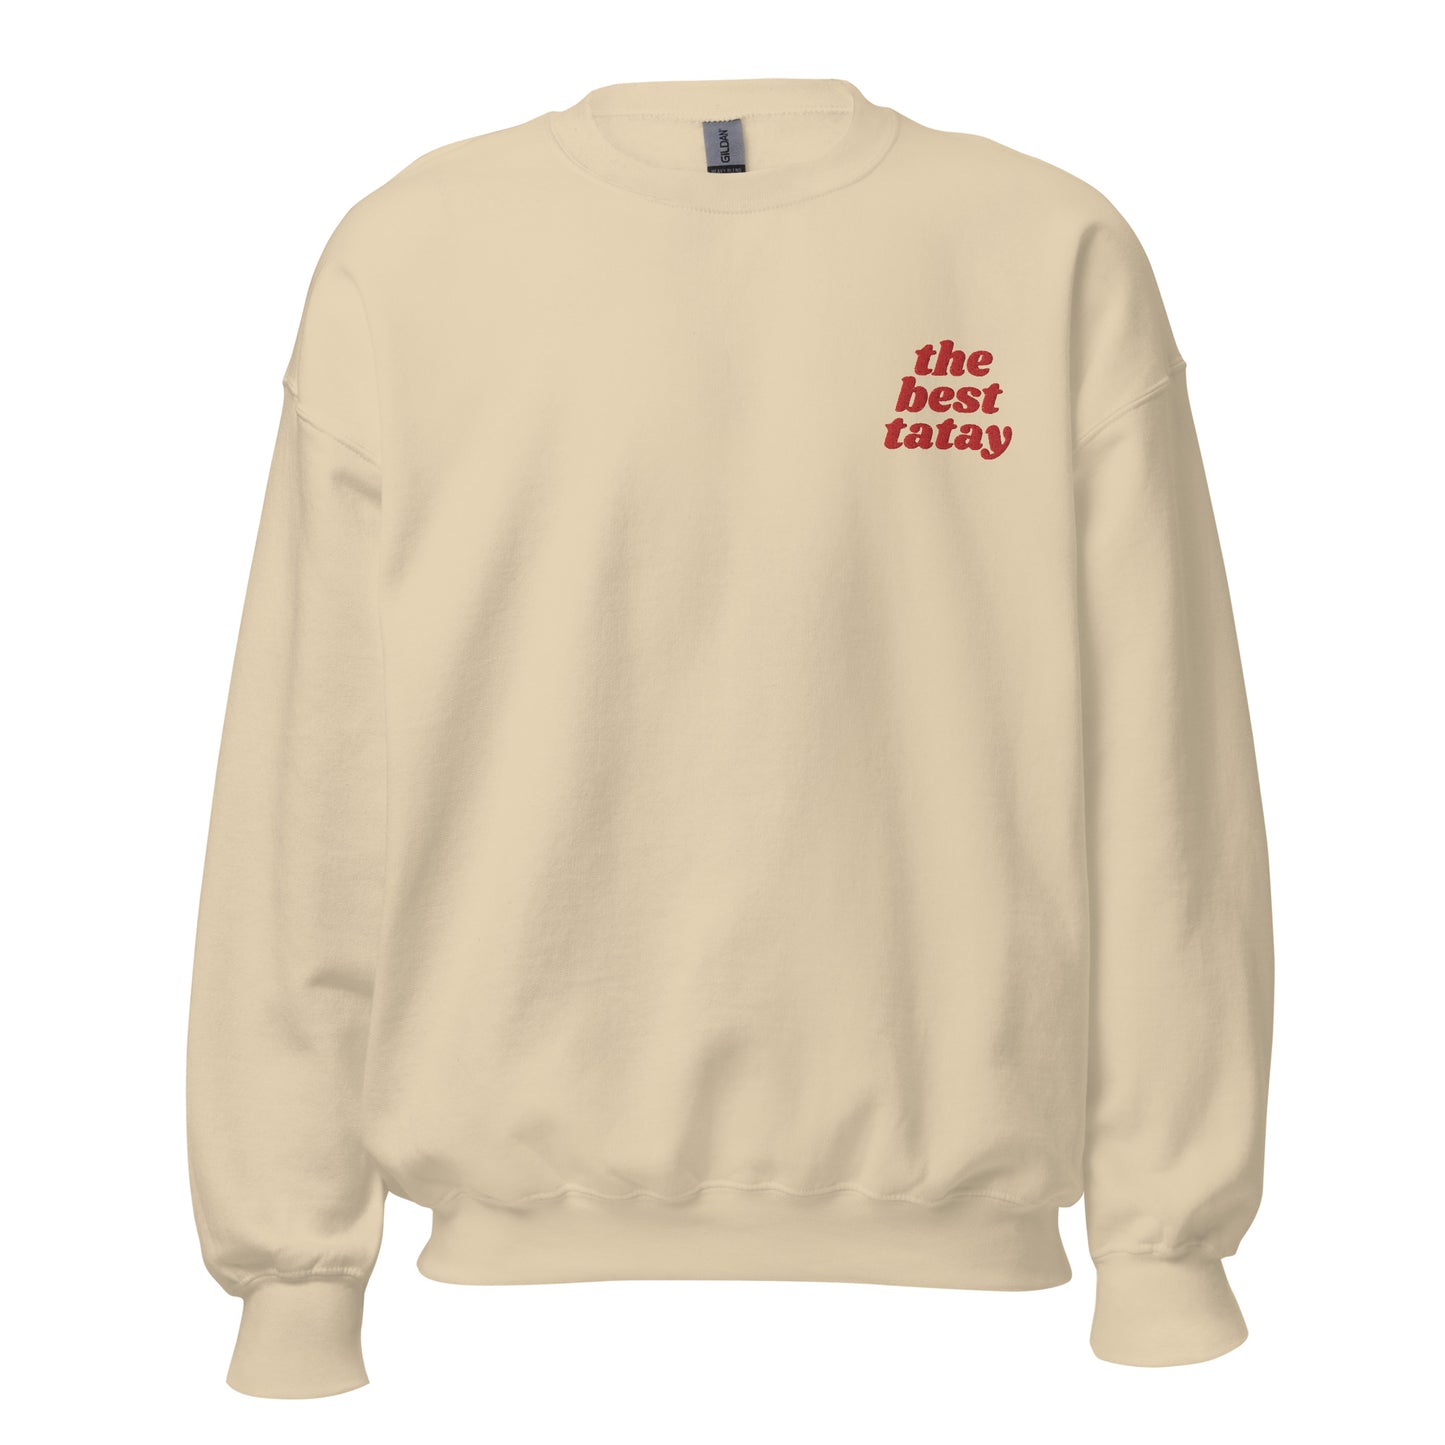 Filipino Sweatshirt Crew Neck The Best Tatay Super Dad Embroidered Father's Day Gift in color variant Sand